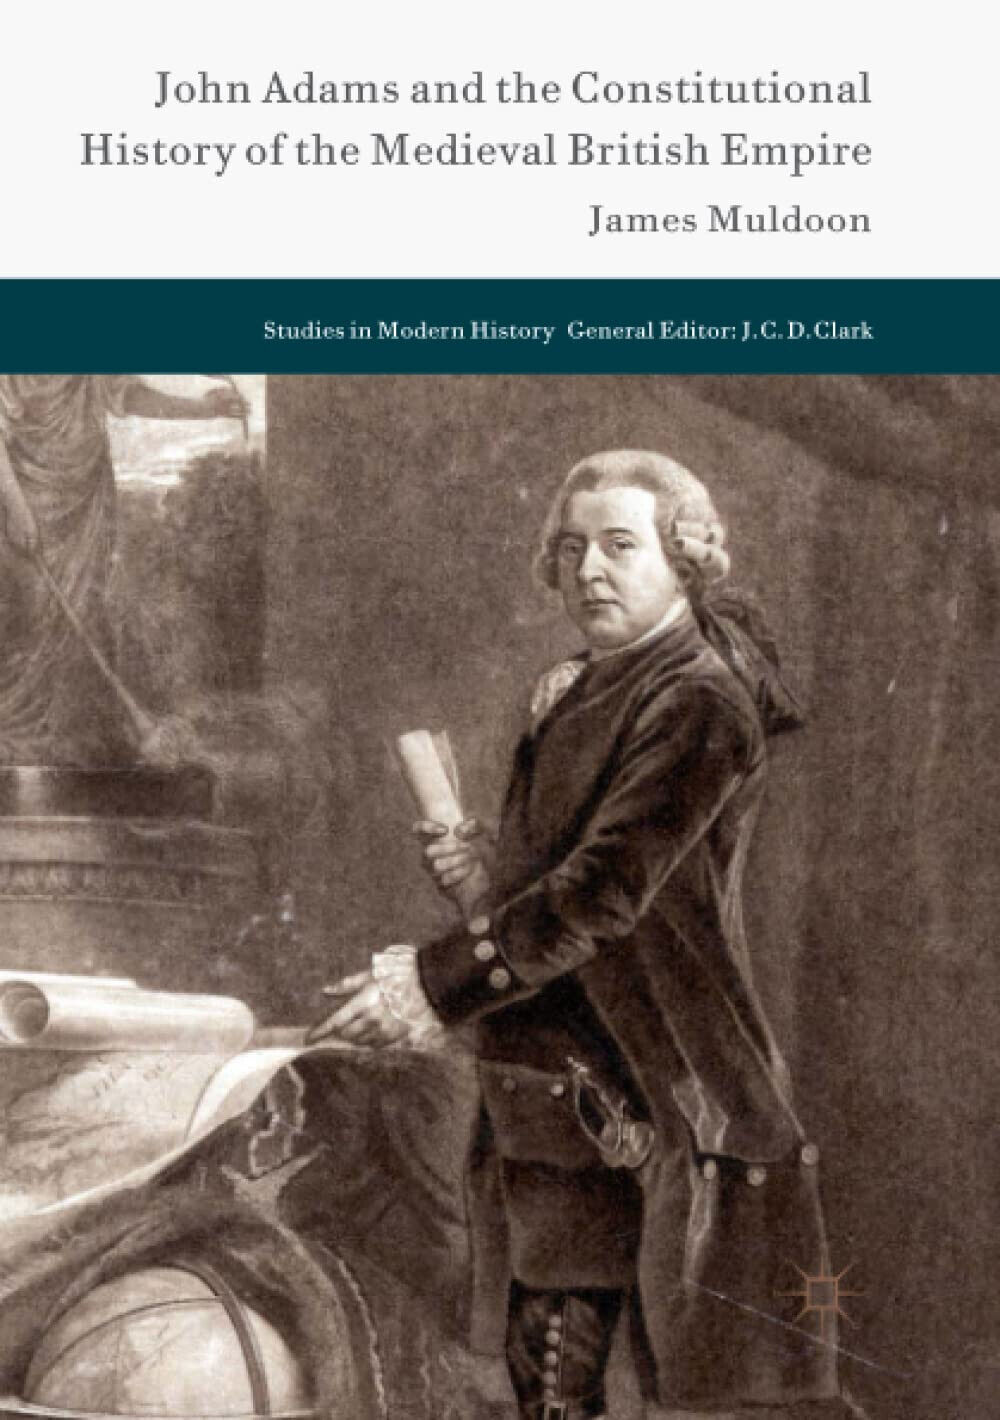 John Adams and the Constitutional History of the Medieval British Empire - 2018